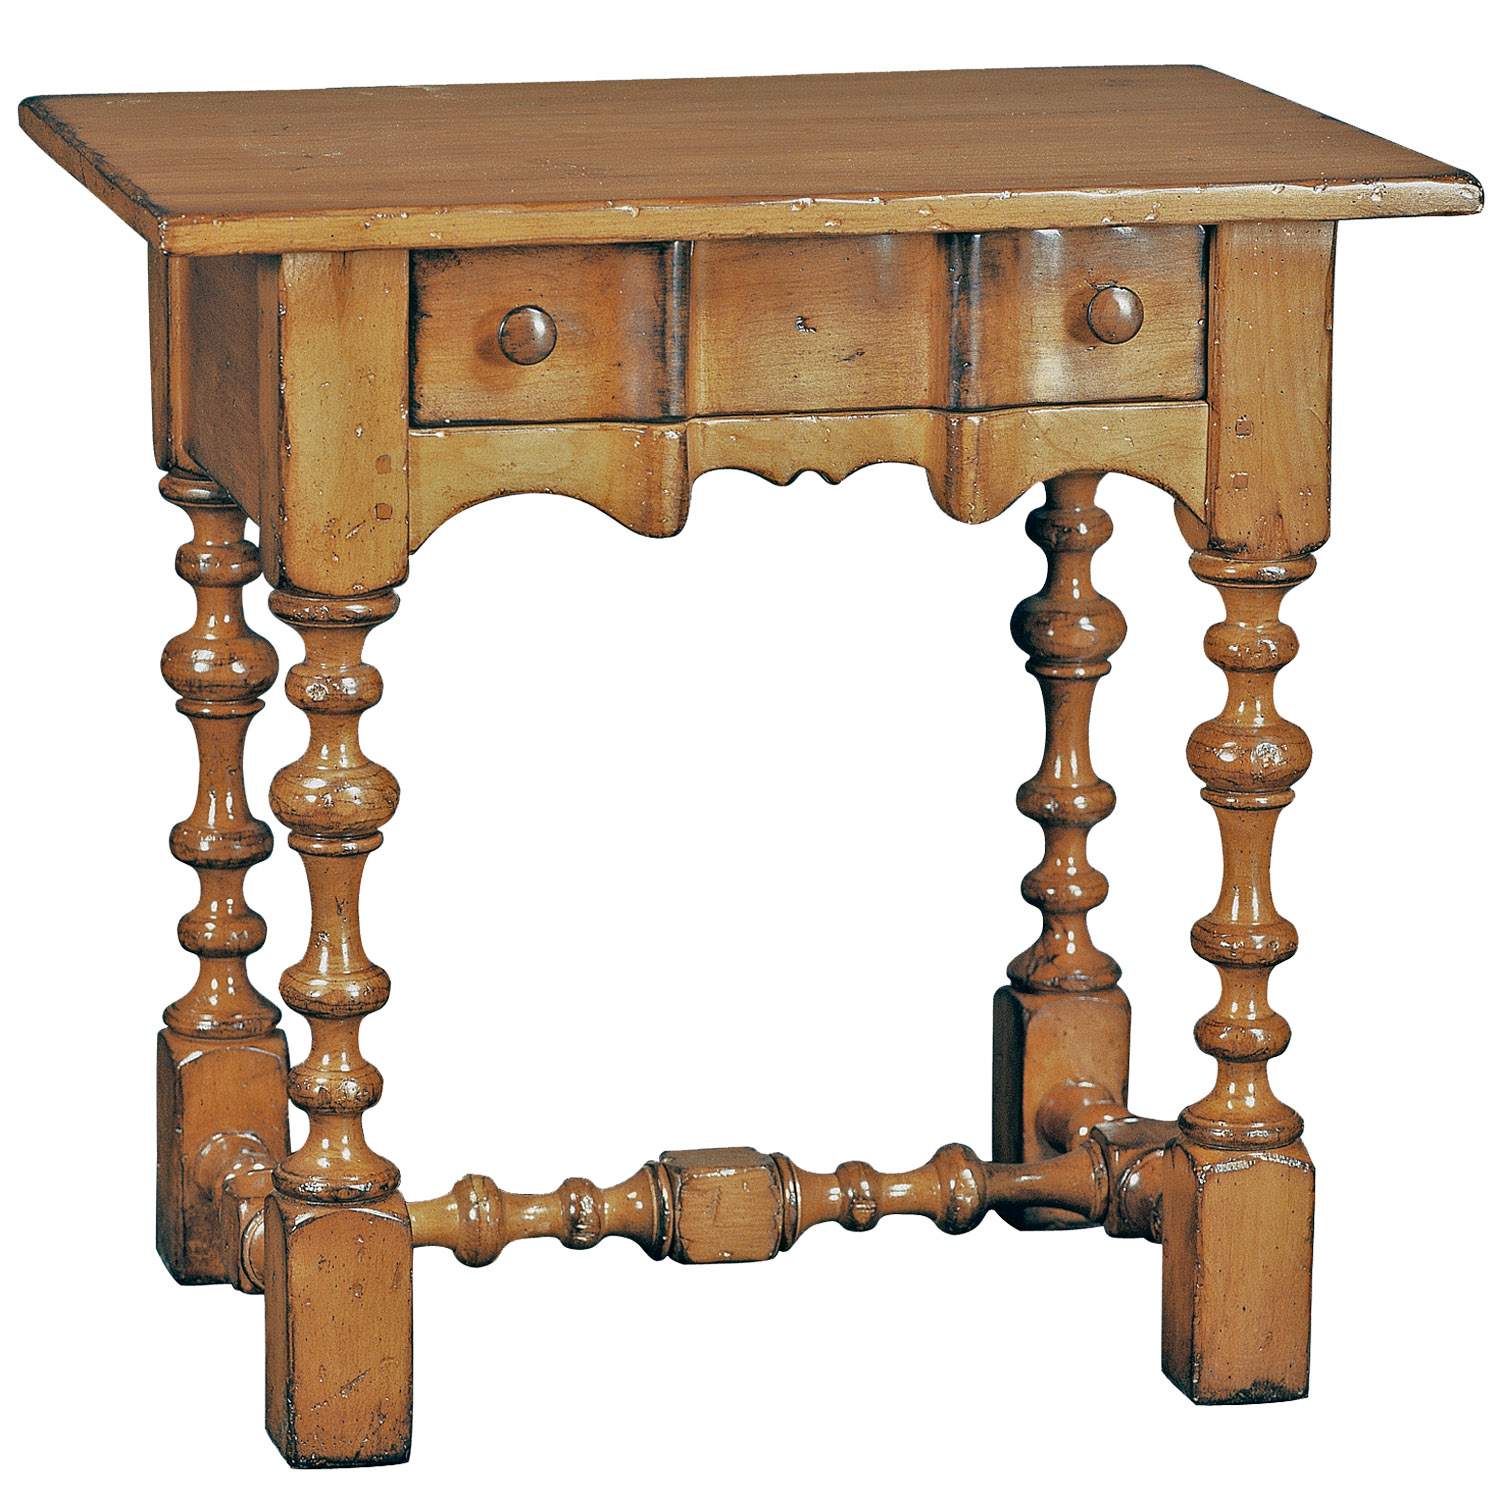 Delamere traditional side or end table with spindle legs and one drawer by Woodland furniture in Idaho Falls